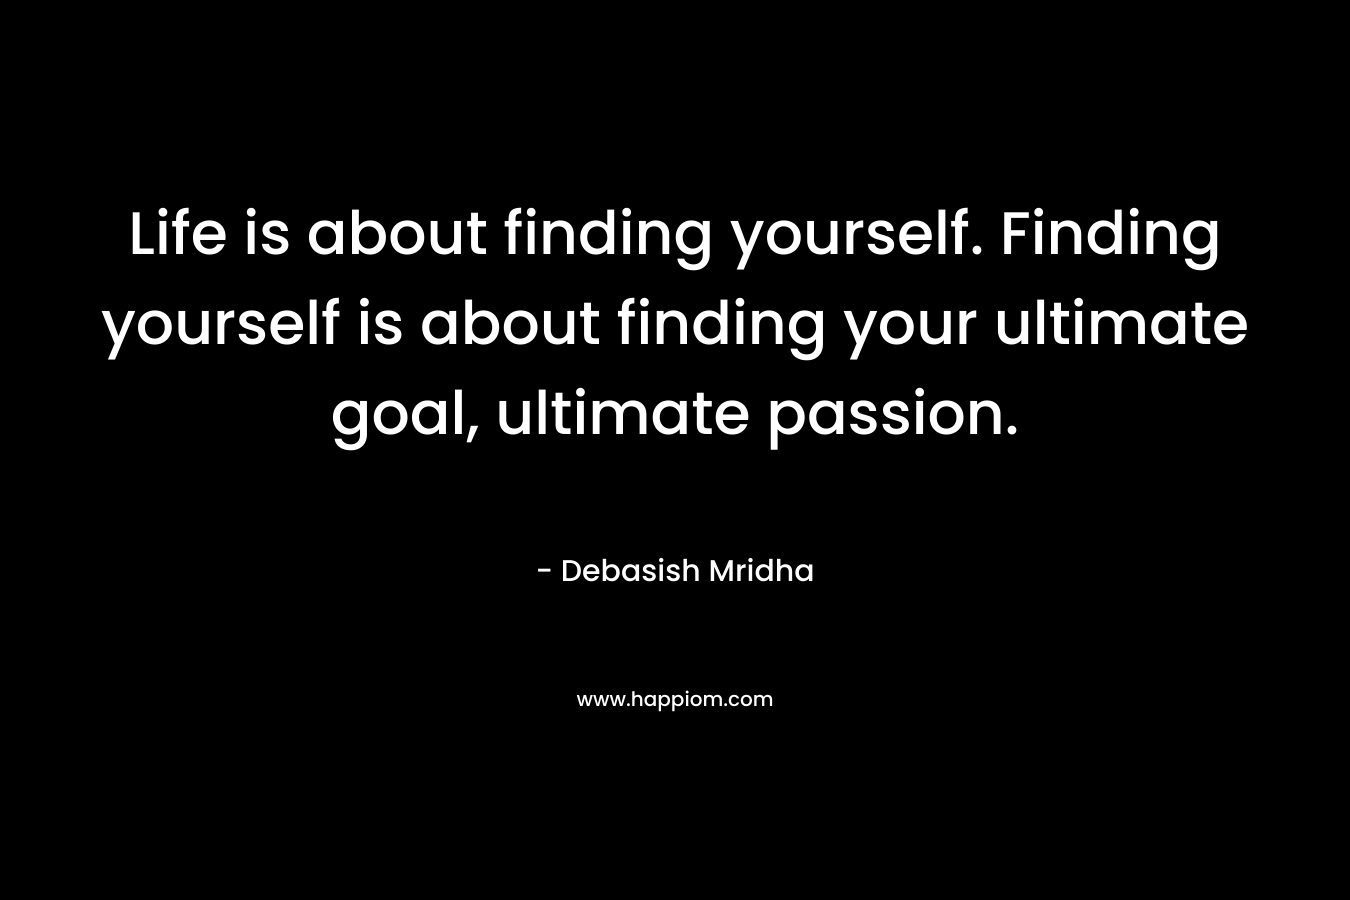 Life is about finding yourself. Finding yourself is about finding your ultimate goal, ultimate passion.